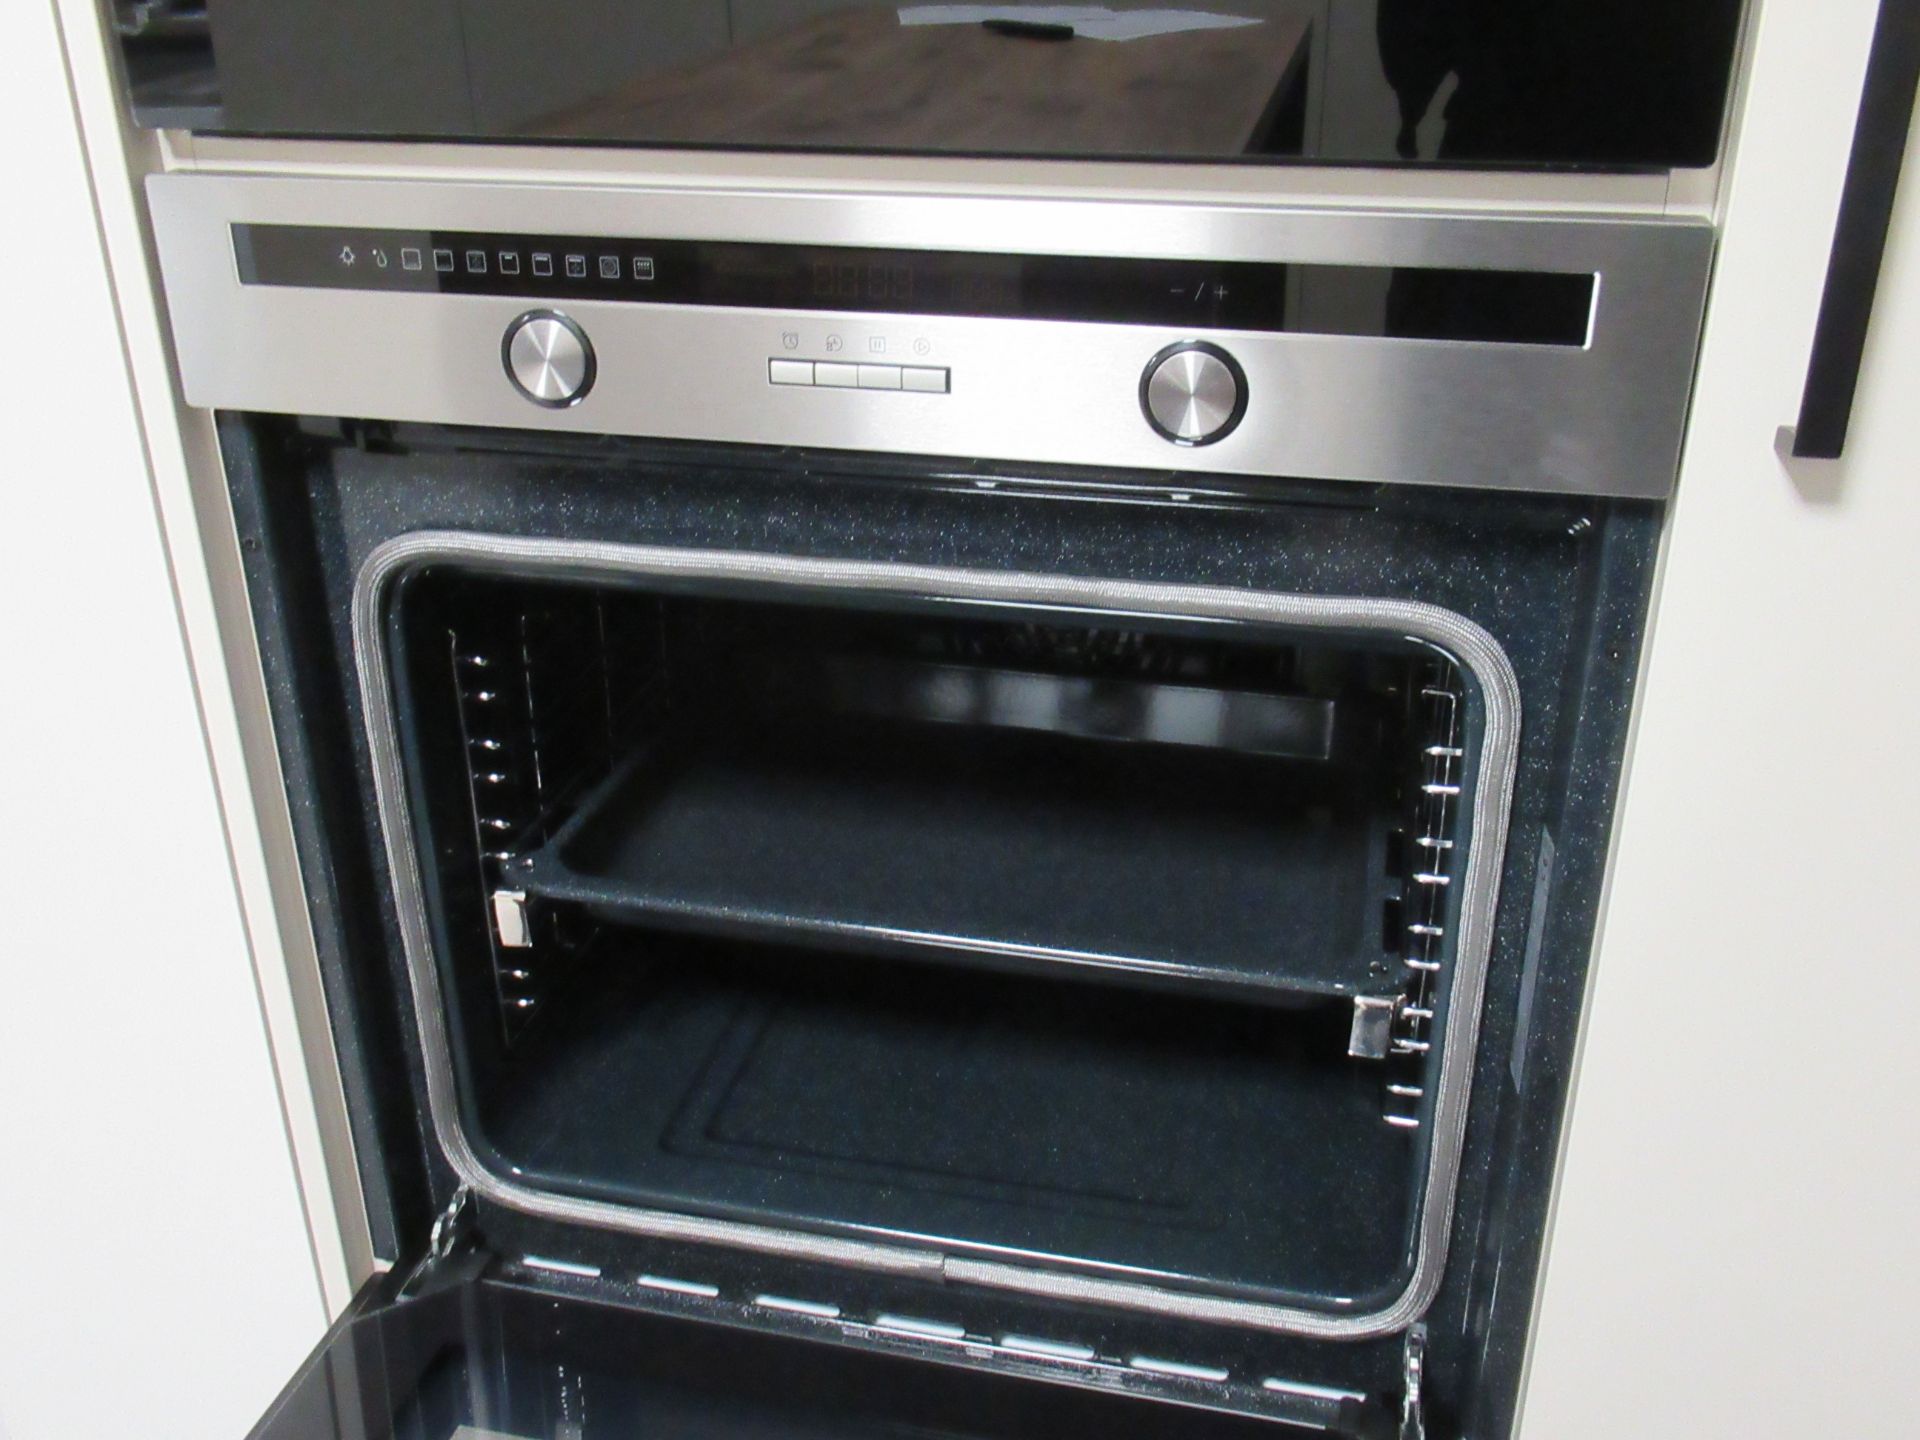 Blaupunkt 5B36PO250GB Built-In Oven - Image 2 of 5